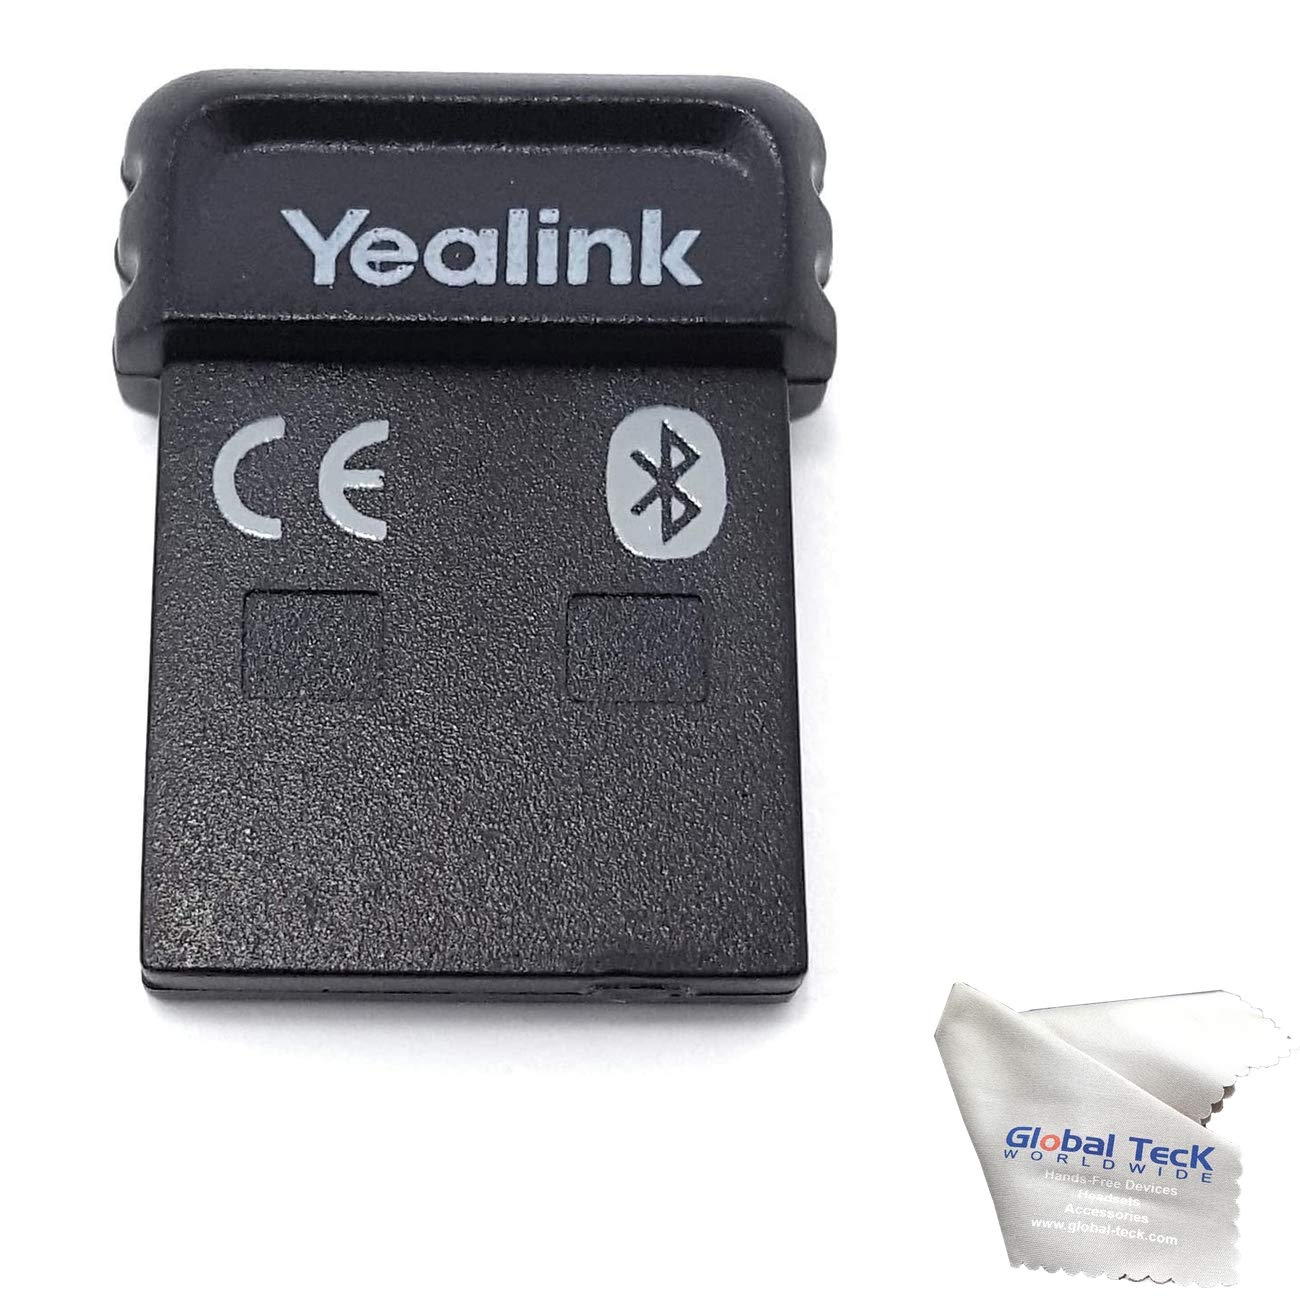 Yealink BT41 Bluetooth Adapter USB Dongle Accessory for Headphones/Headsets - for Yealink IP Phones T27G, T29G, T46G, T48G, T41S, T42S, T46S, T48S, T53, GTW Microfiber